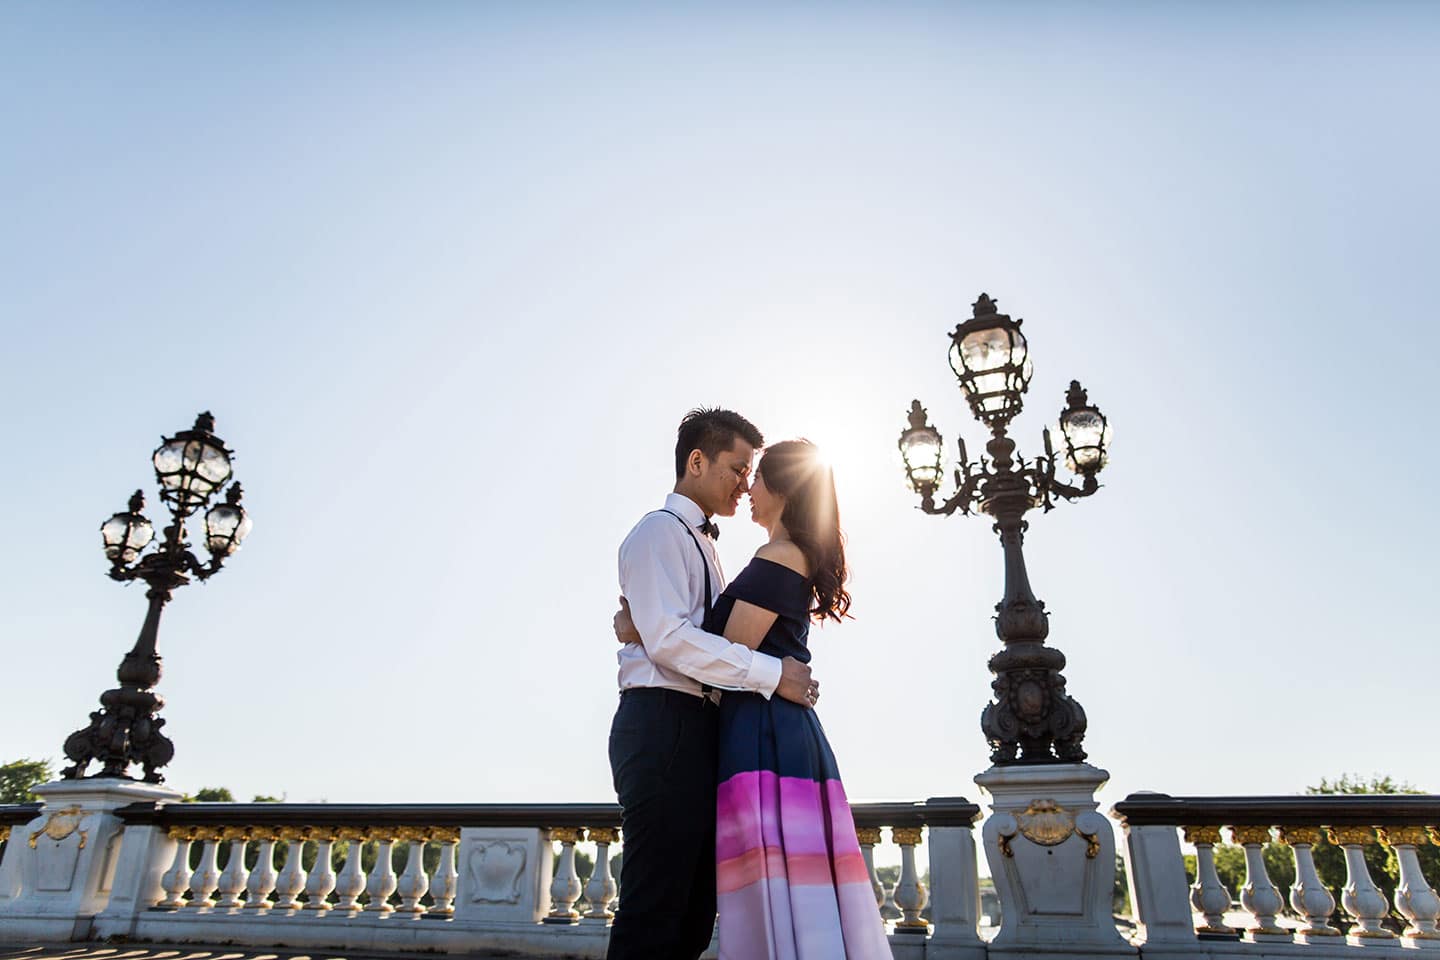 Couple photoshoot in Paris, France